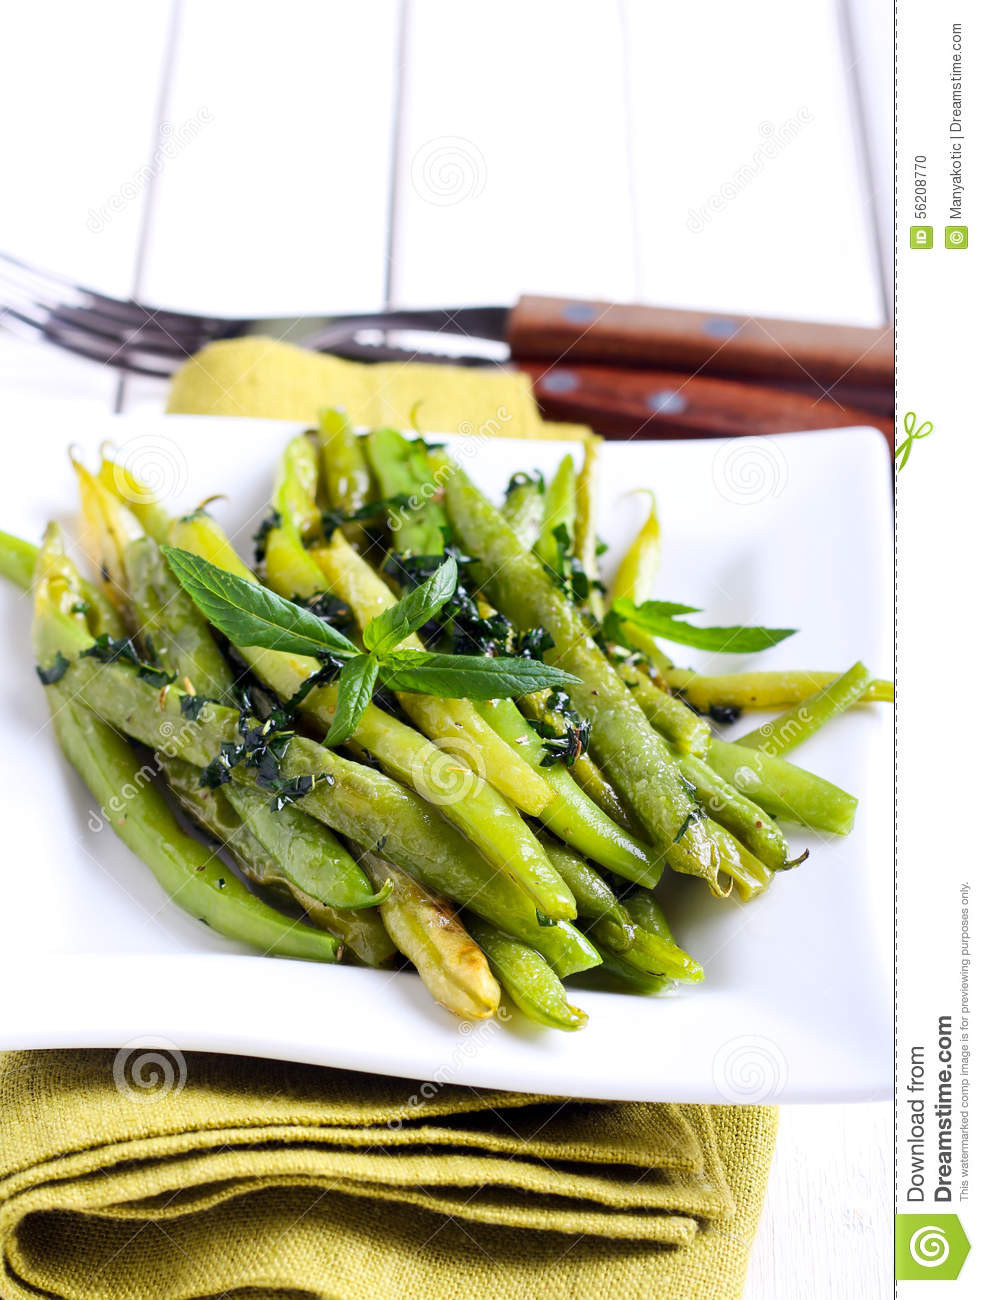 Green Bean Appetizer
 Minted Green Bean Appetizer Stock Image of food